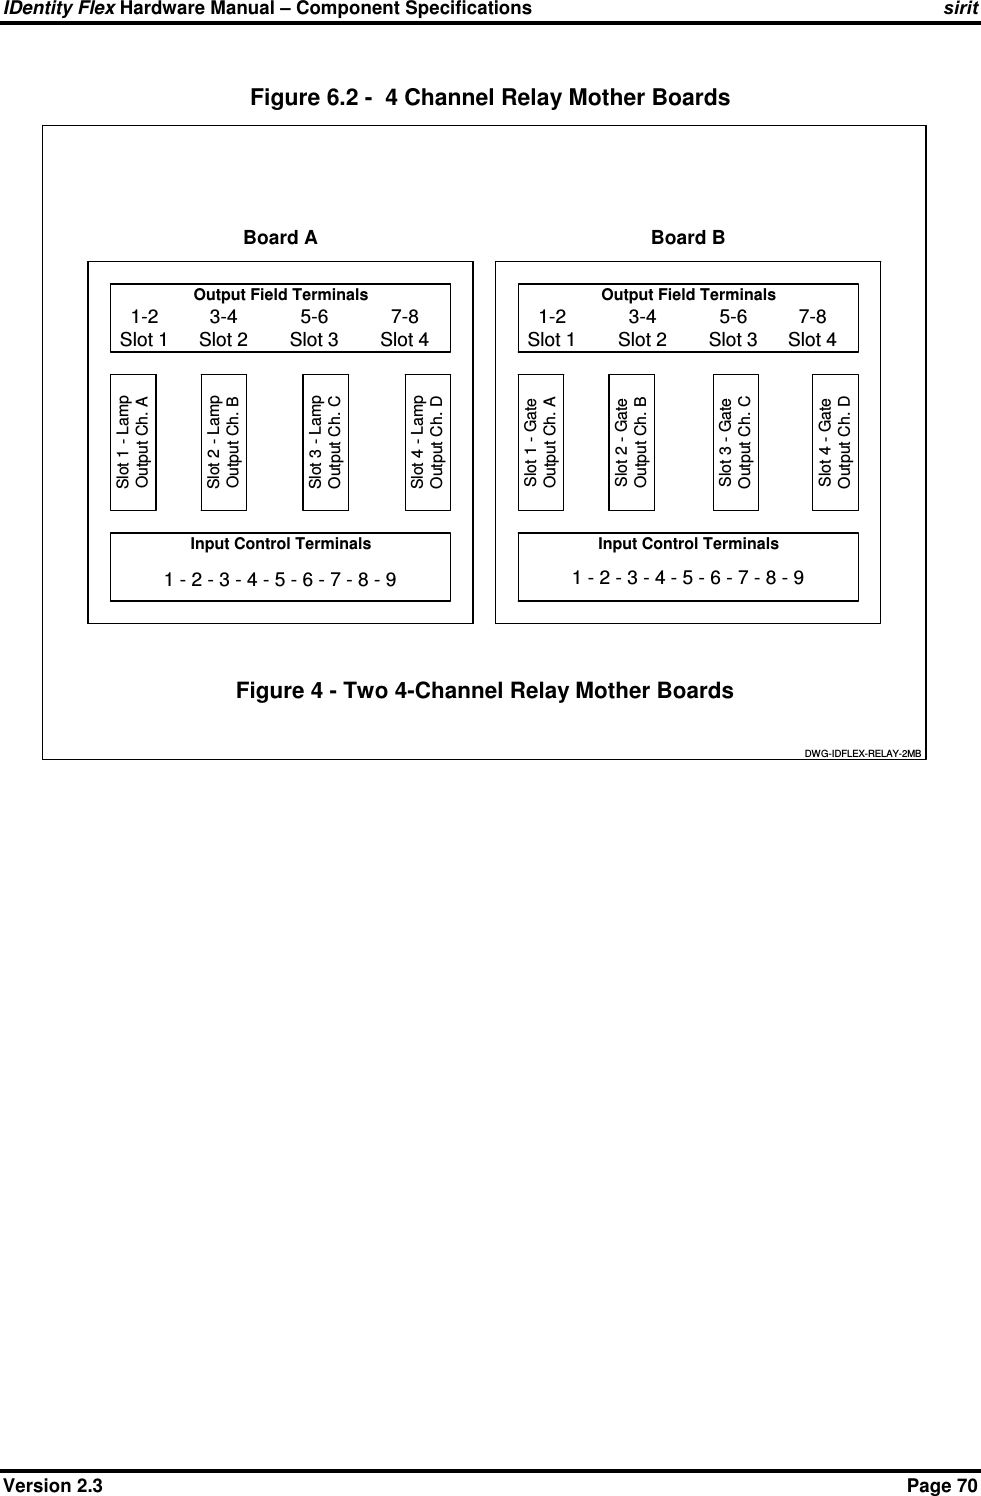 IDentity Flex Hardware Manual – Component Specifications sirit Version 2.3    Page 70 Figure 6.2 -  4 Channel Relay Mother Boards Output Field Terminals Output Field Terminals1-2Slot 11-2Slot 13-4Slot 23-4Slot 25-6Slot 37-8Slot 45-6Slot 37-8Slot 4Input Control Terminals Input Control Terminals1 - 2 - 3 - 4 - 5 - 6 - 7 - 8 - 9 1 - 2 - 3 - 4 - 5 - 6 - 7 - 8 - 9Slot 1 - LampOutput Ch. ASlot 2 - LampOutput Ch. BSlot 3 - LampOutput Ch. CSlot 4 - LampOutput Ch. DSlot 1 - GateOutput Ch. ASlot 2 - GateOutput Ch. BSlot 3 - GateOutput Ch. CSlot 4 - GateOutput Ch. DBoard A Board BFigure 4 - Two 4-Channel Relay Mother BoardsDWG-IDFLEX-RELAY-2MB               